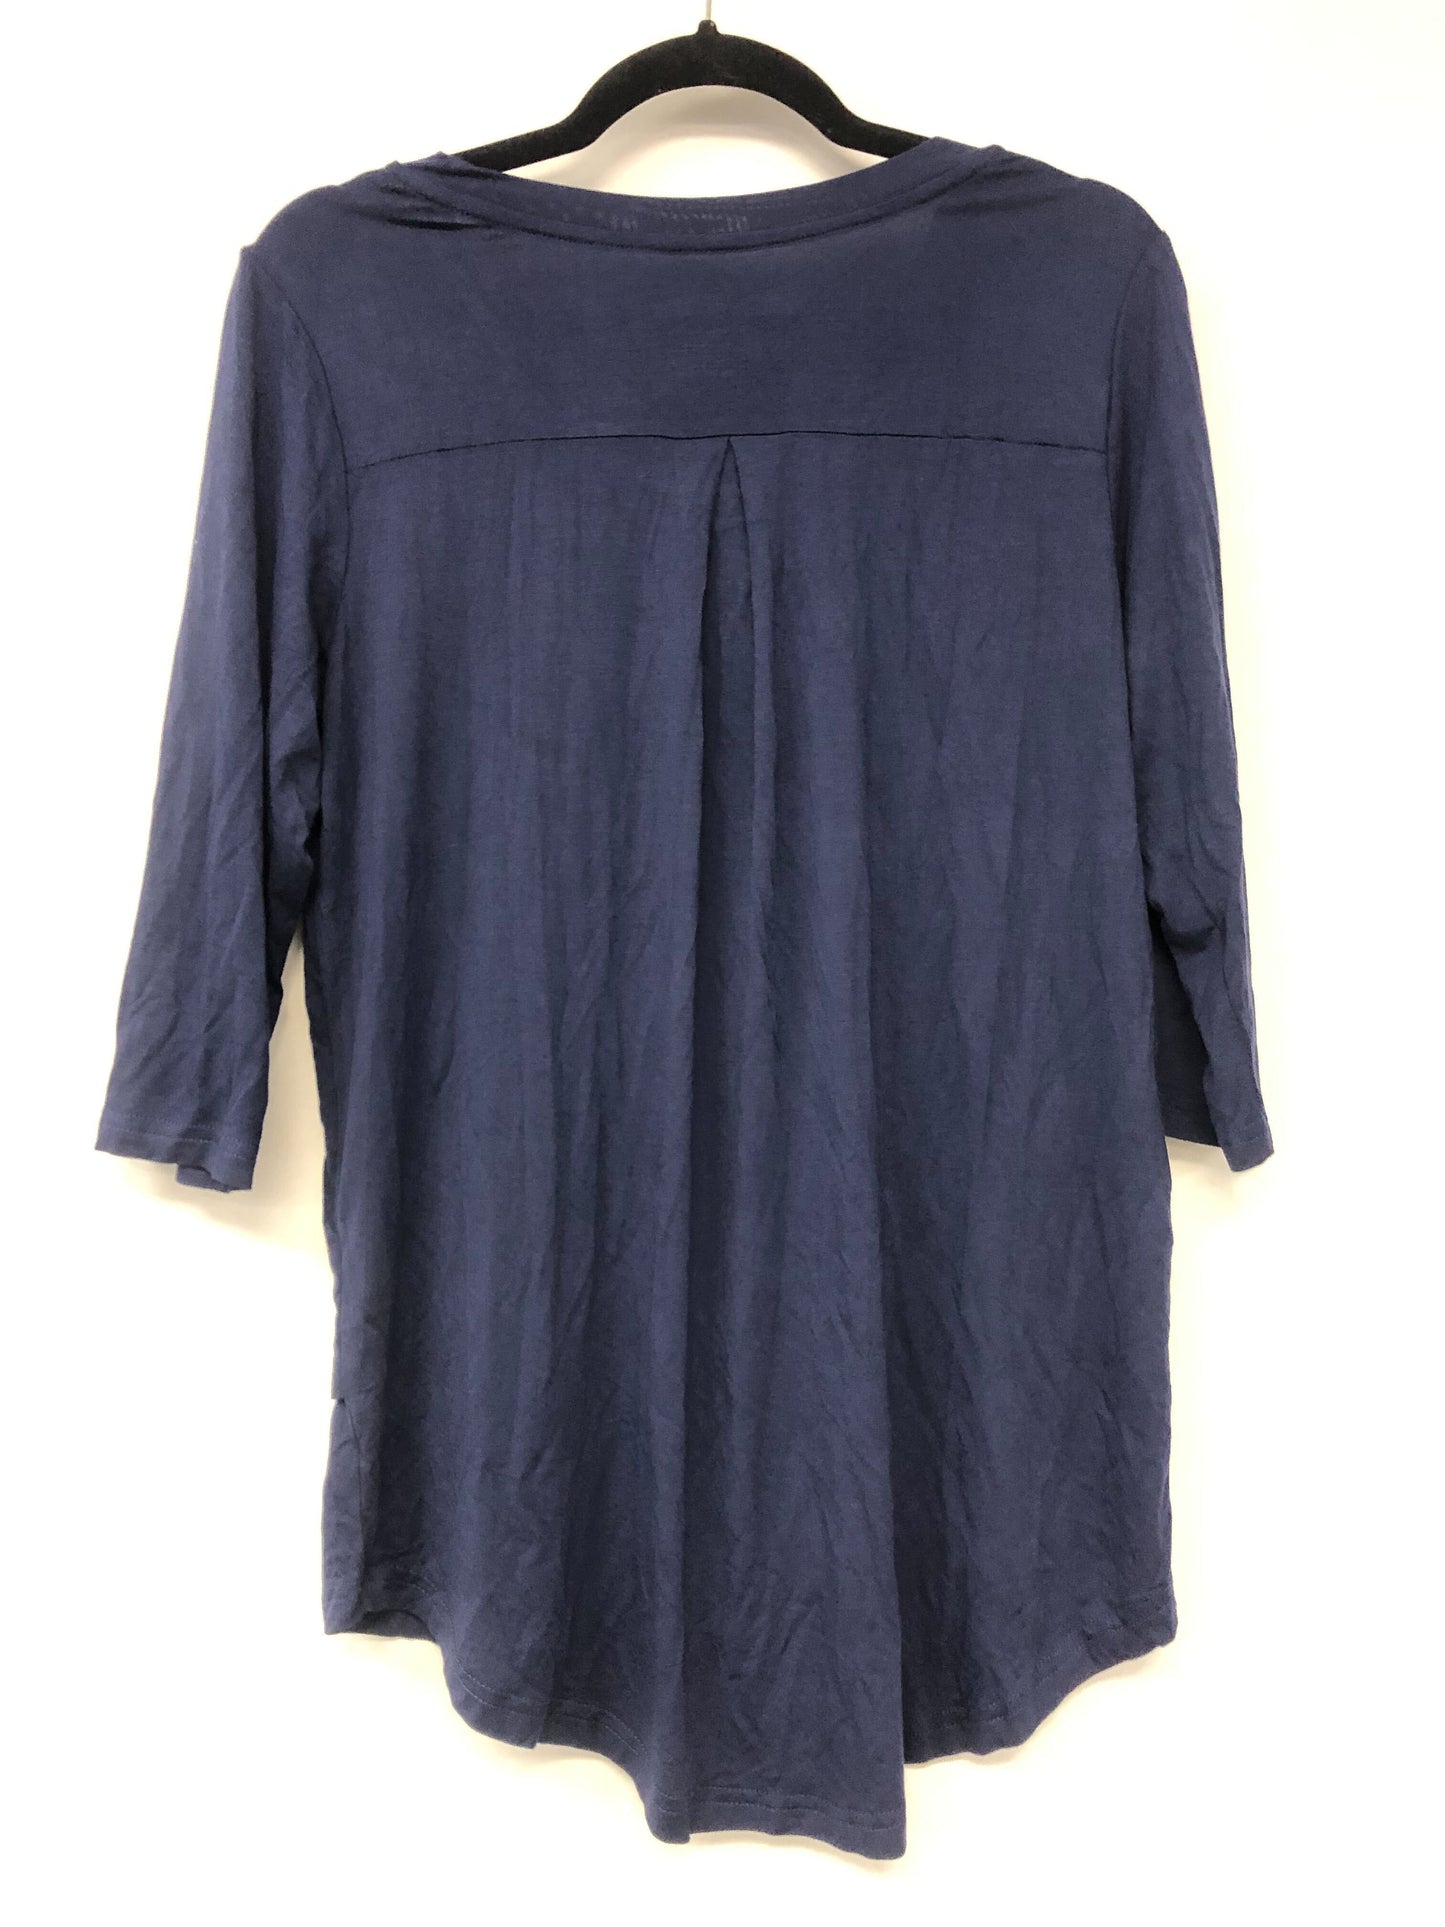 Outlet 6136 - Latched Mama Oxytocin Scoop Neck Nursing Top - Navy - Small